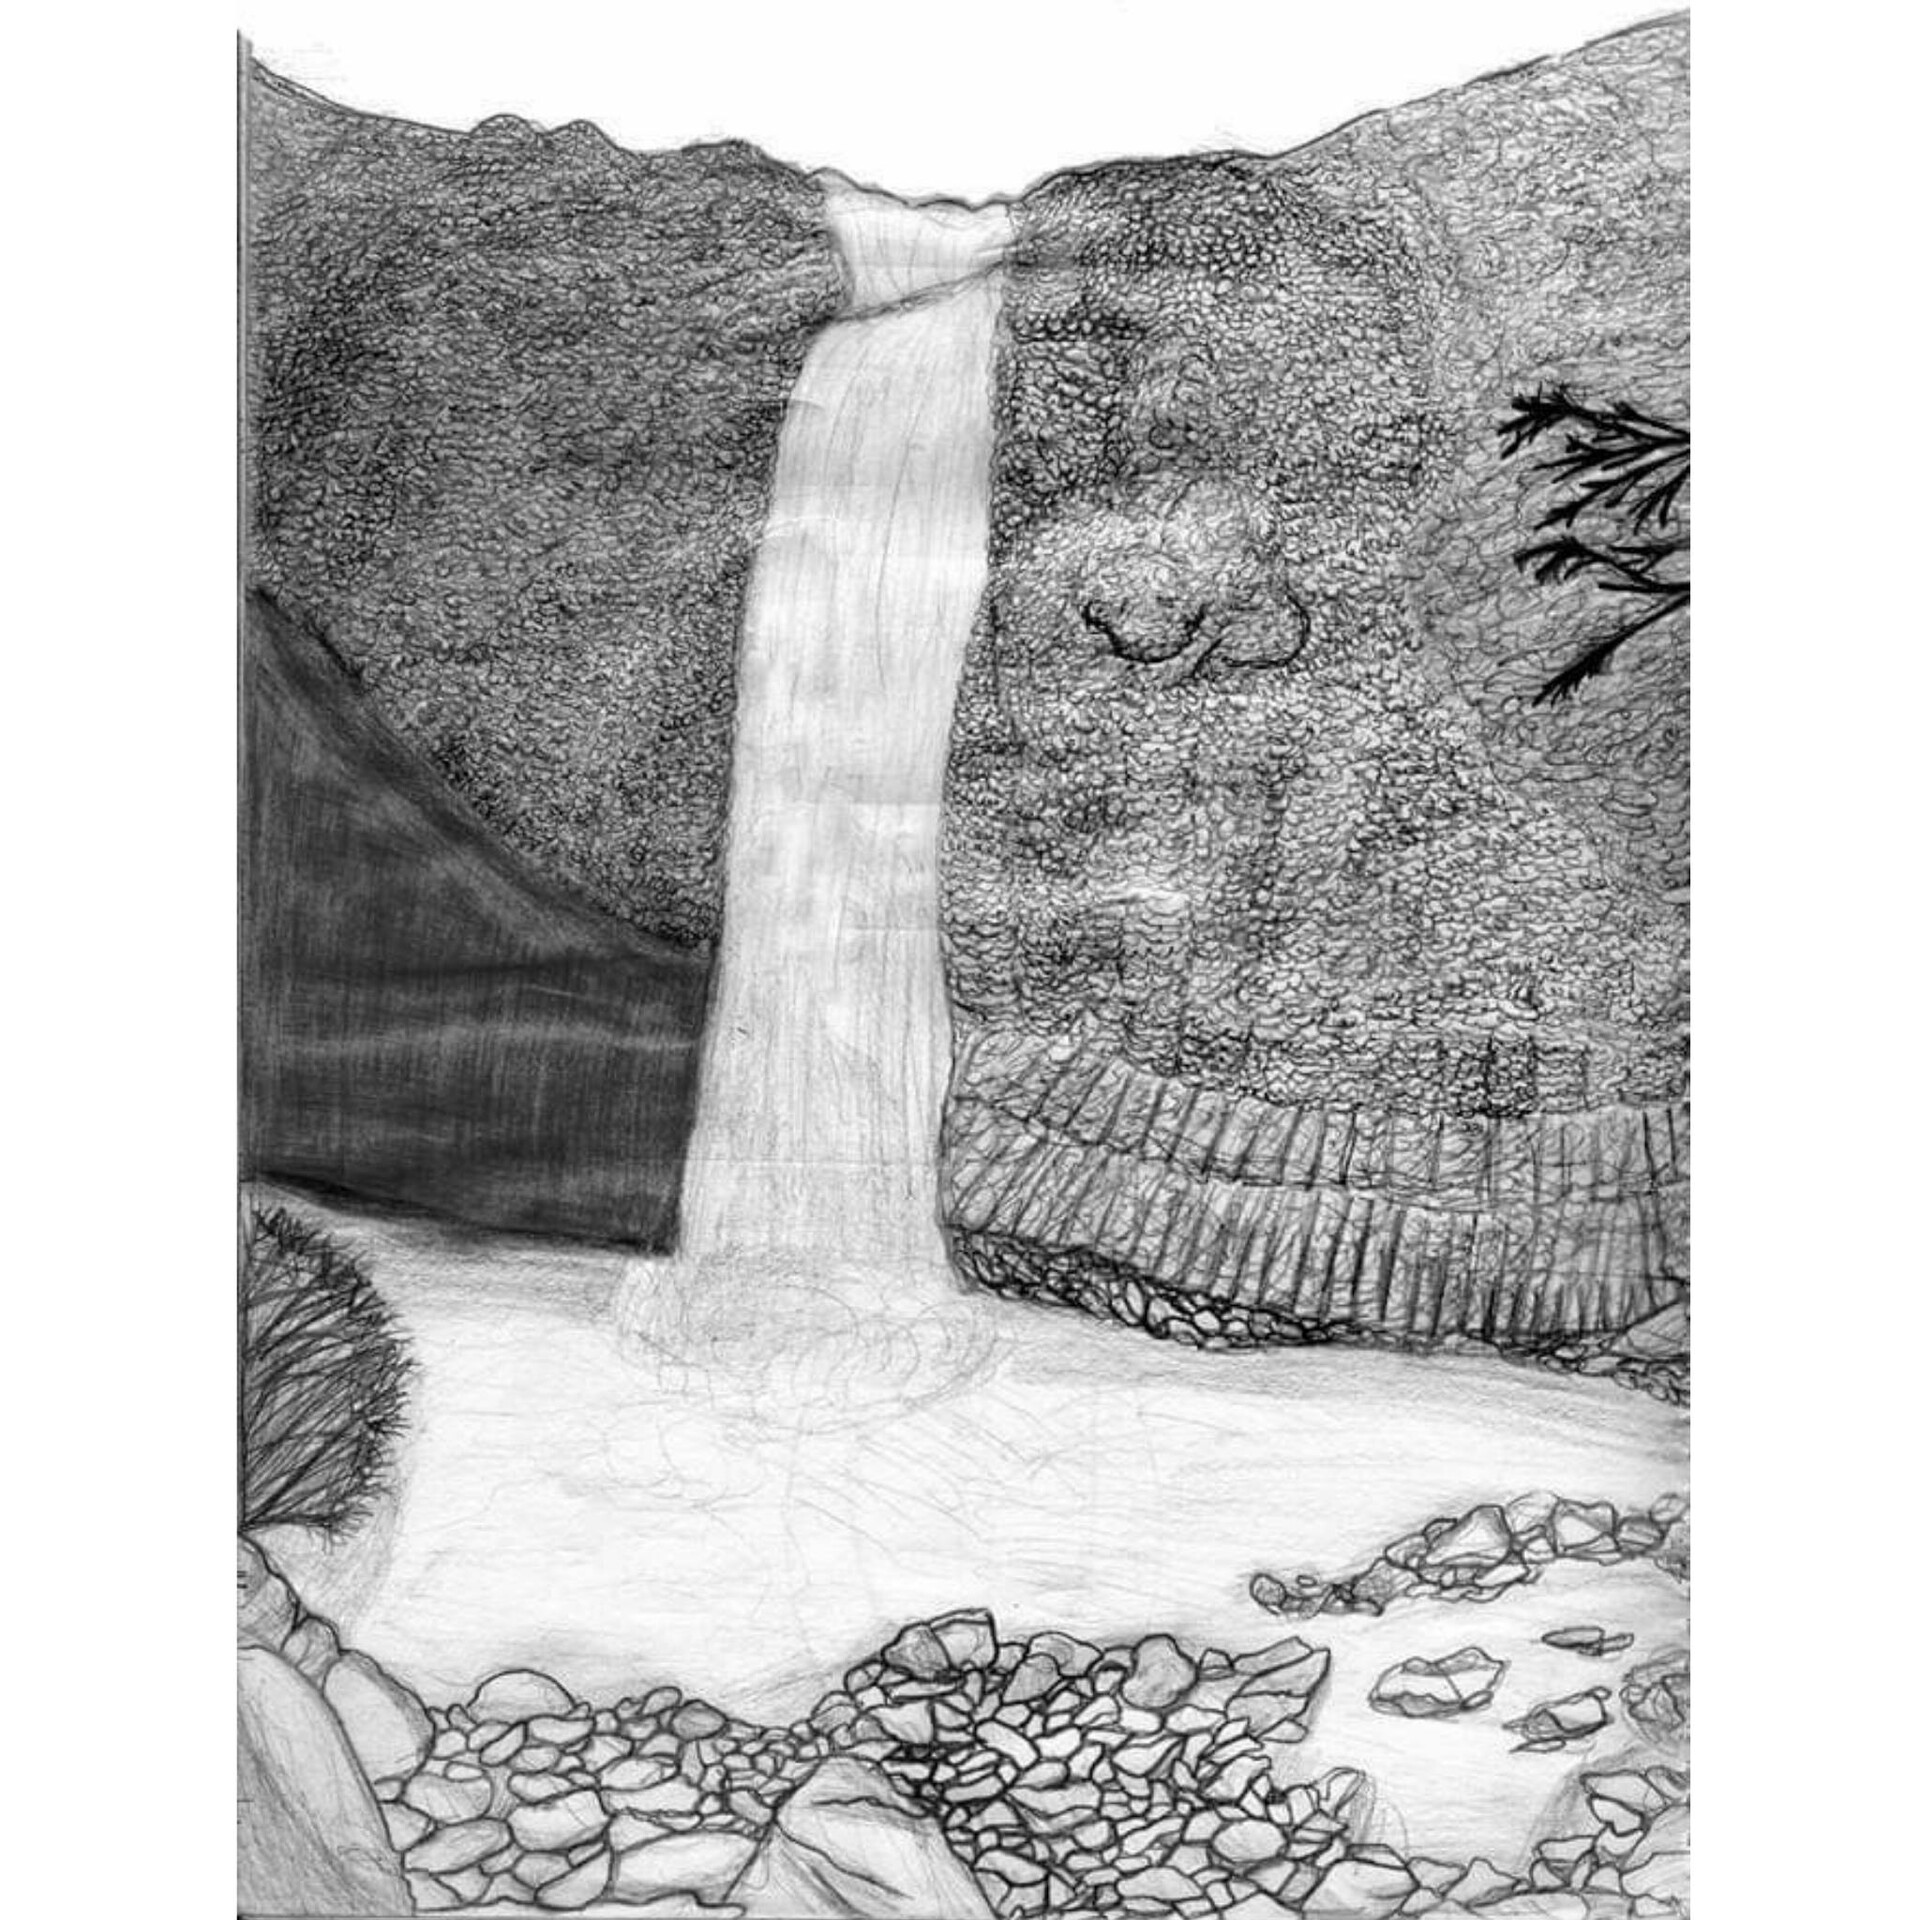 How To Draw Waterfall - Draw A Waterfall Step By Step - Free Transparent  PNG Download - PNGkey